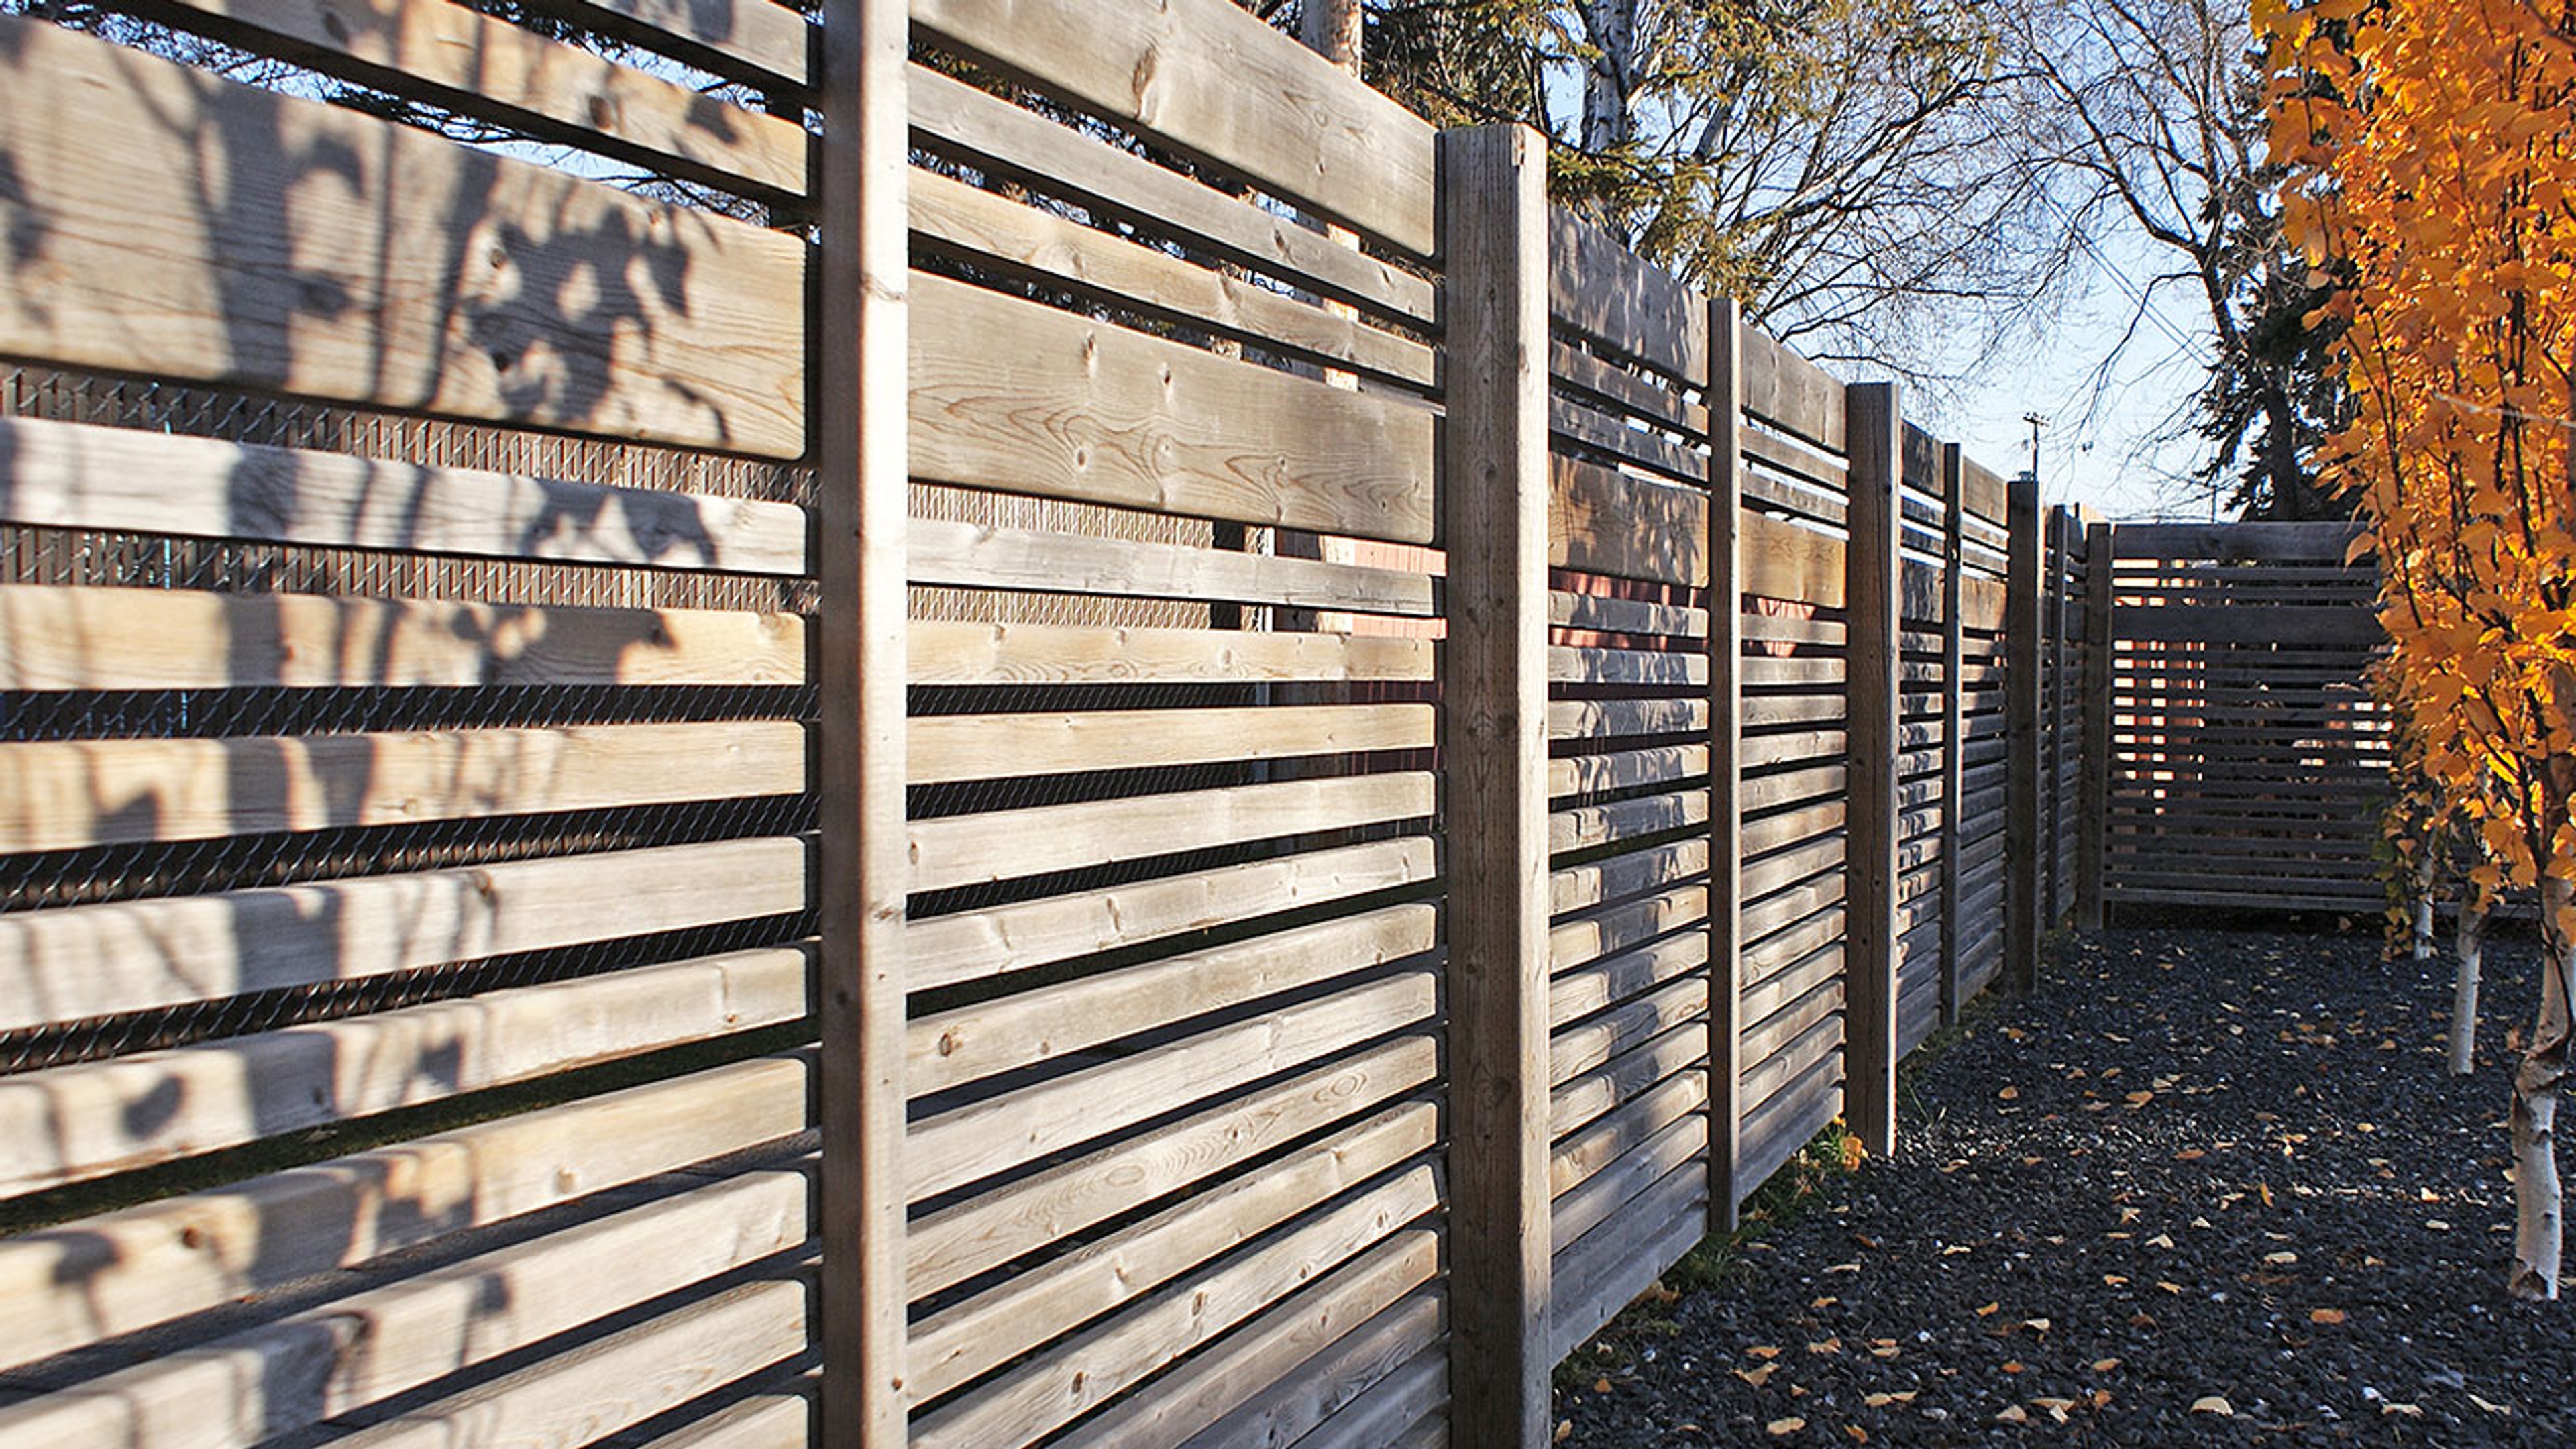 Claywork Design & Construction: Funky Fence